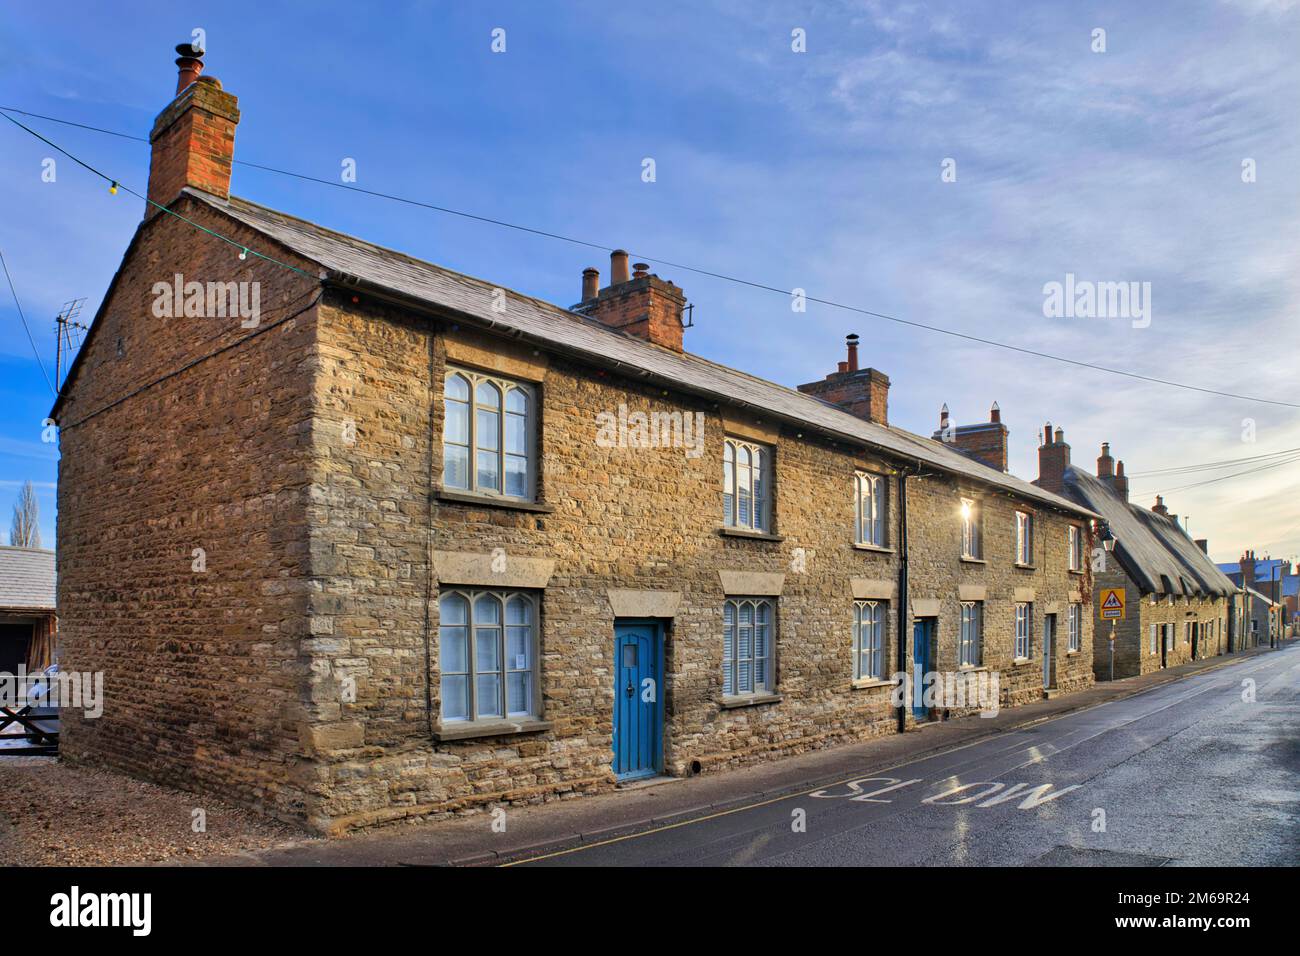 Sharnbrook, Bedfordshire, England, UK - Stone built cottages in the village high street Stock Photo